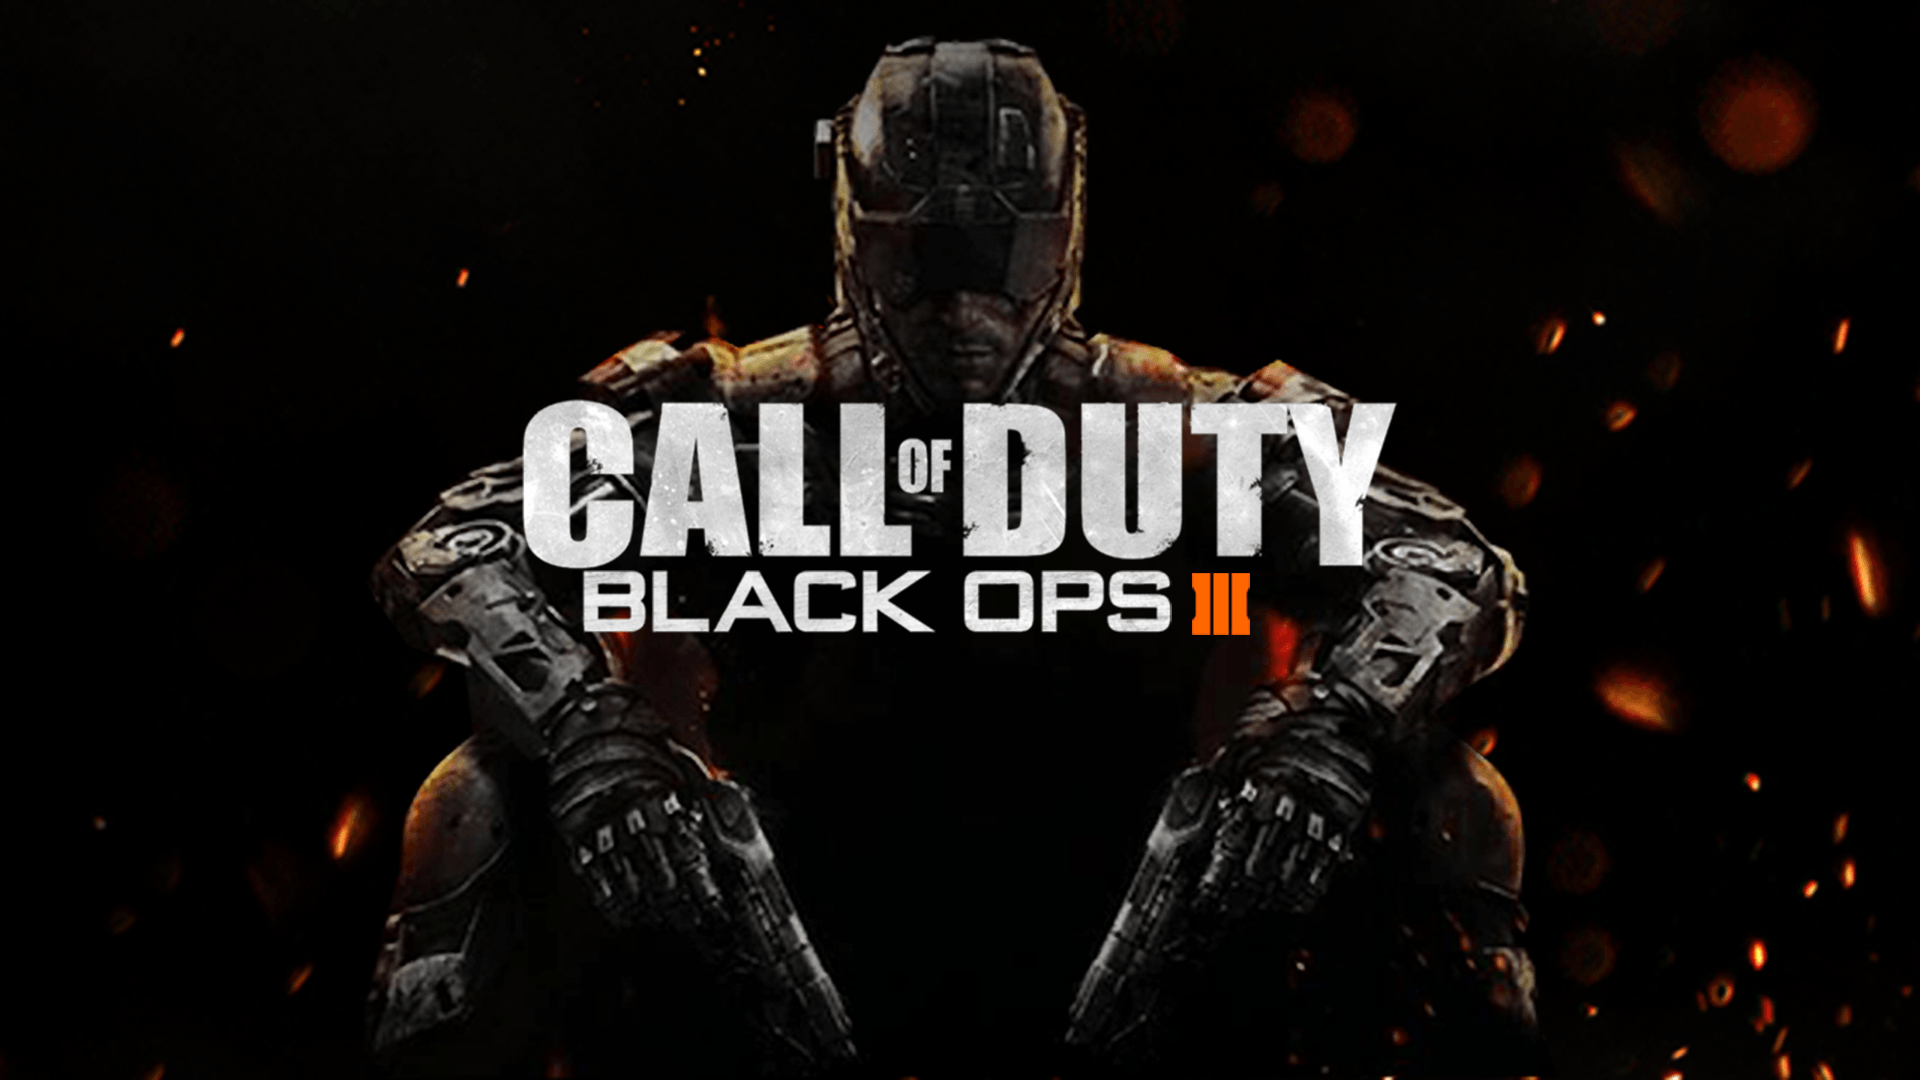 call-of-duty-black-ops-iii-wallpapers-wallpaper-cave